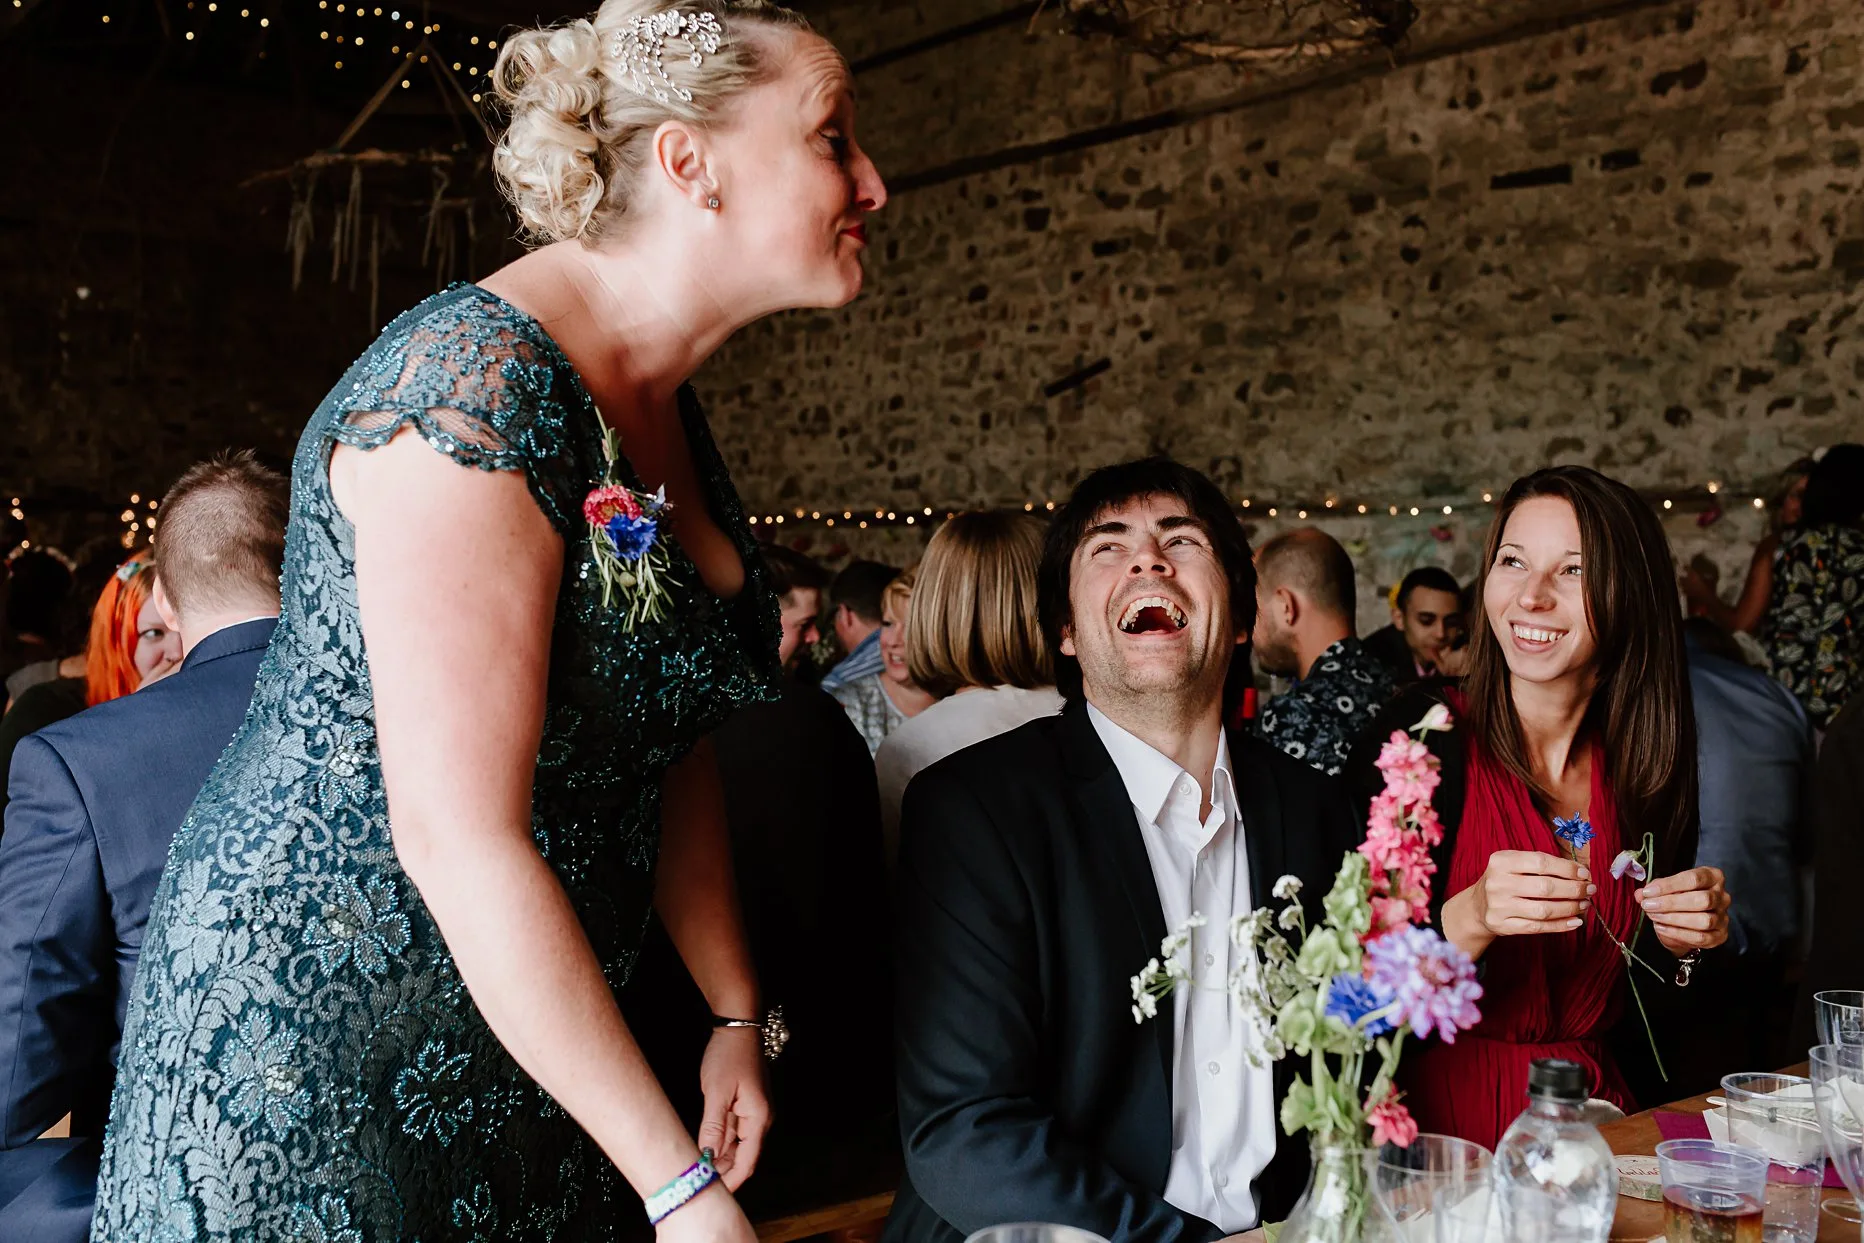 Three wedding guests laughing and being silly during wedding breakfast.